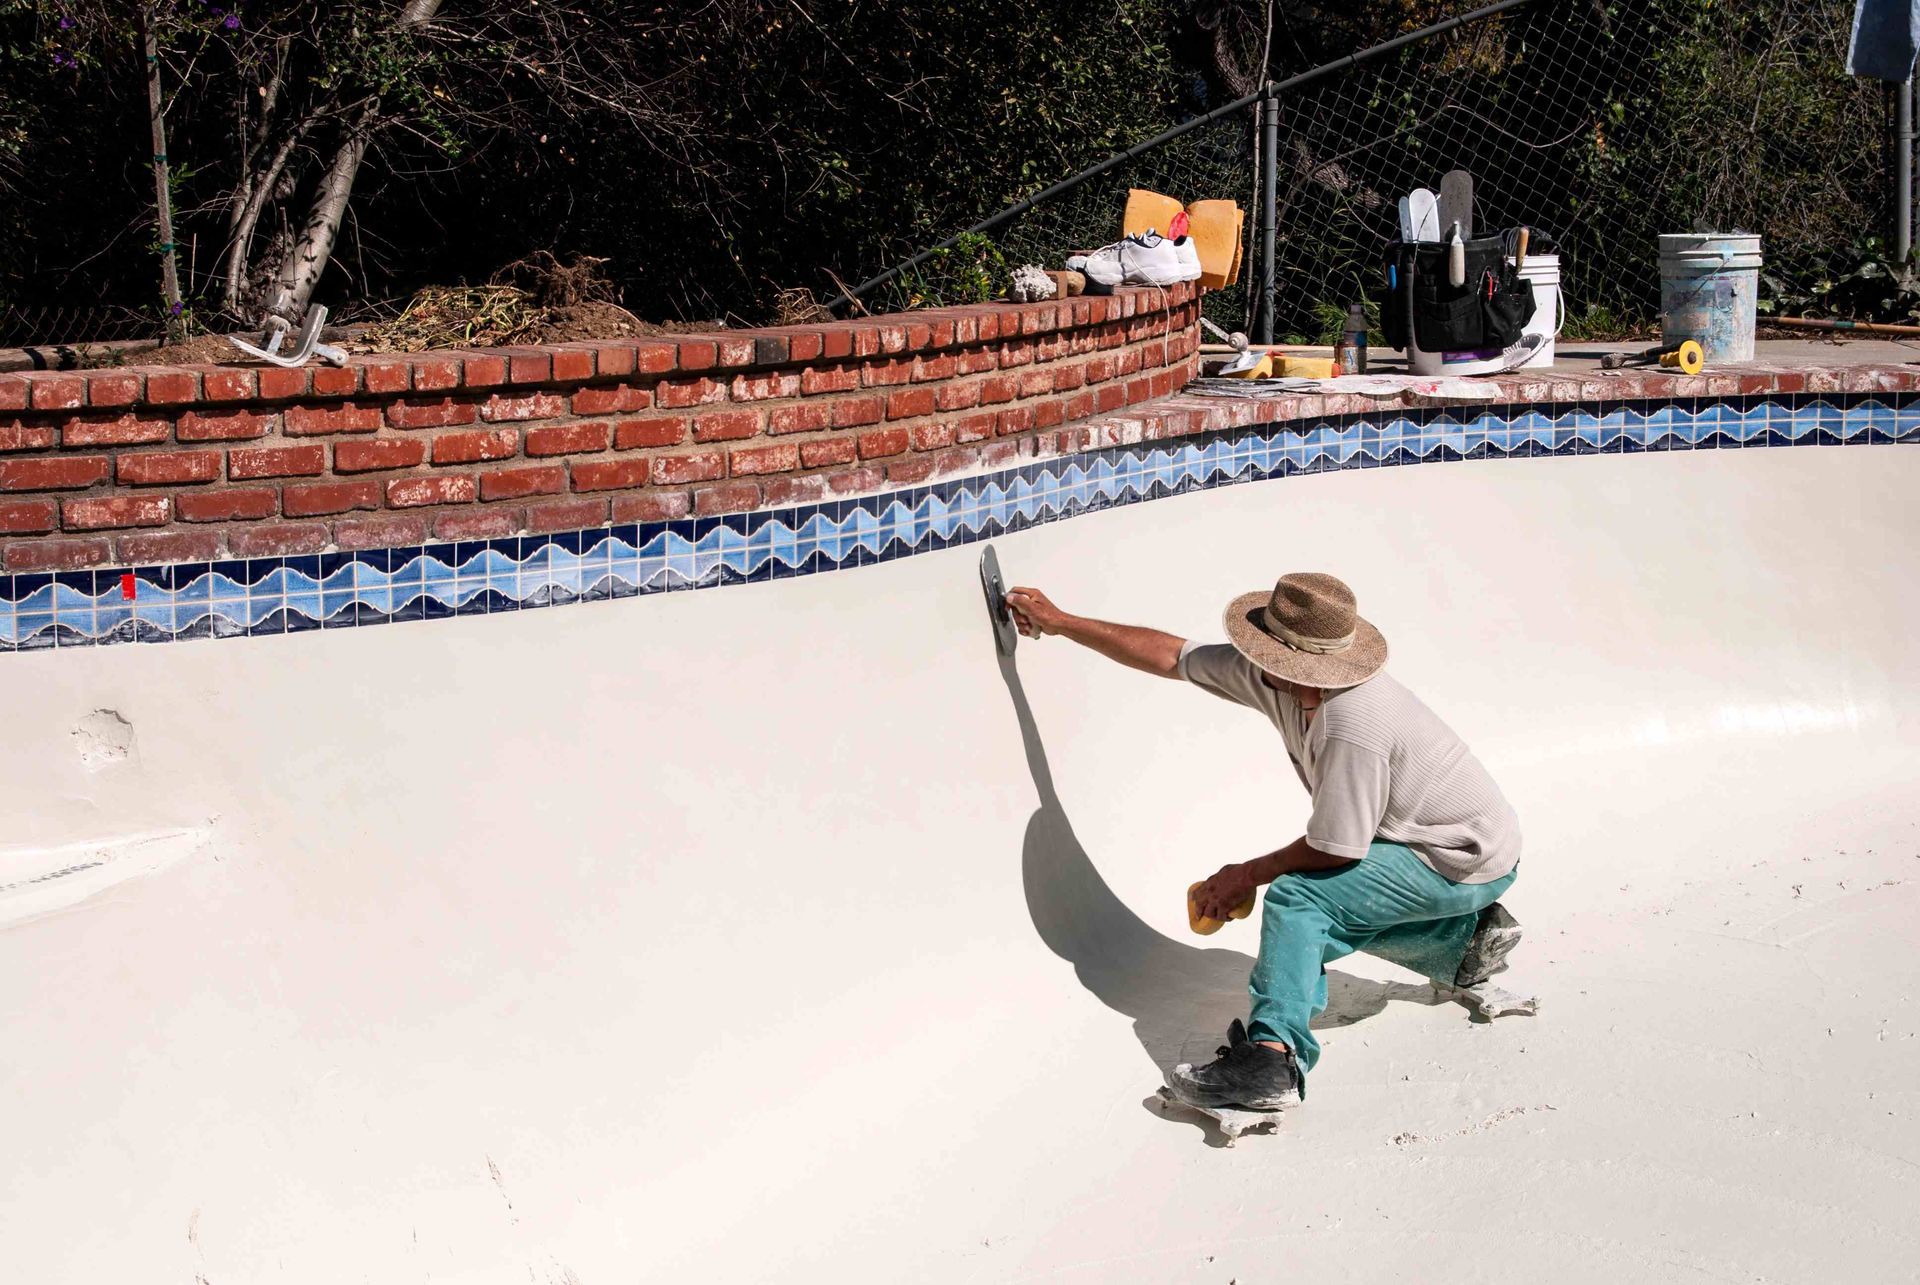 A man working on installing a pool